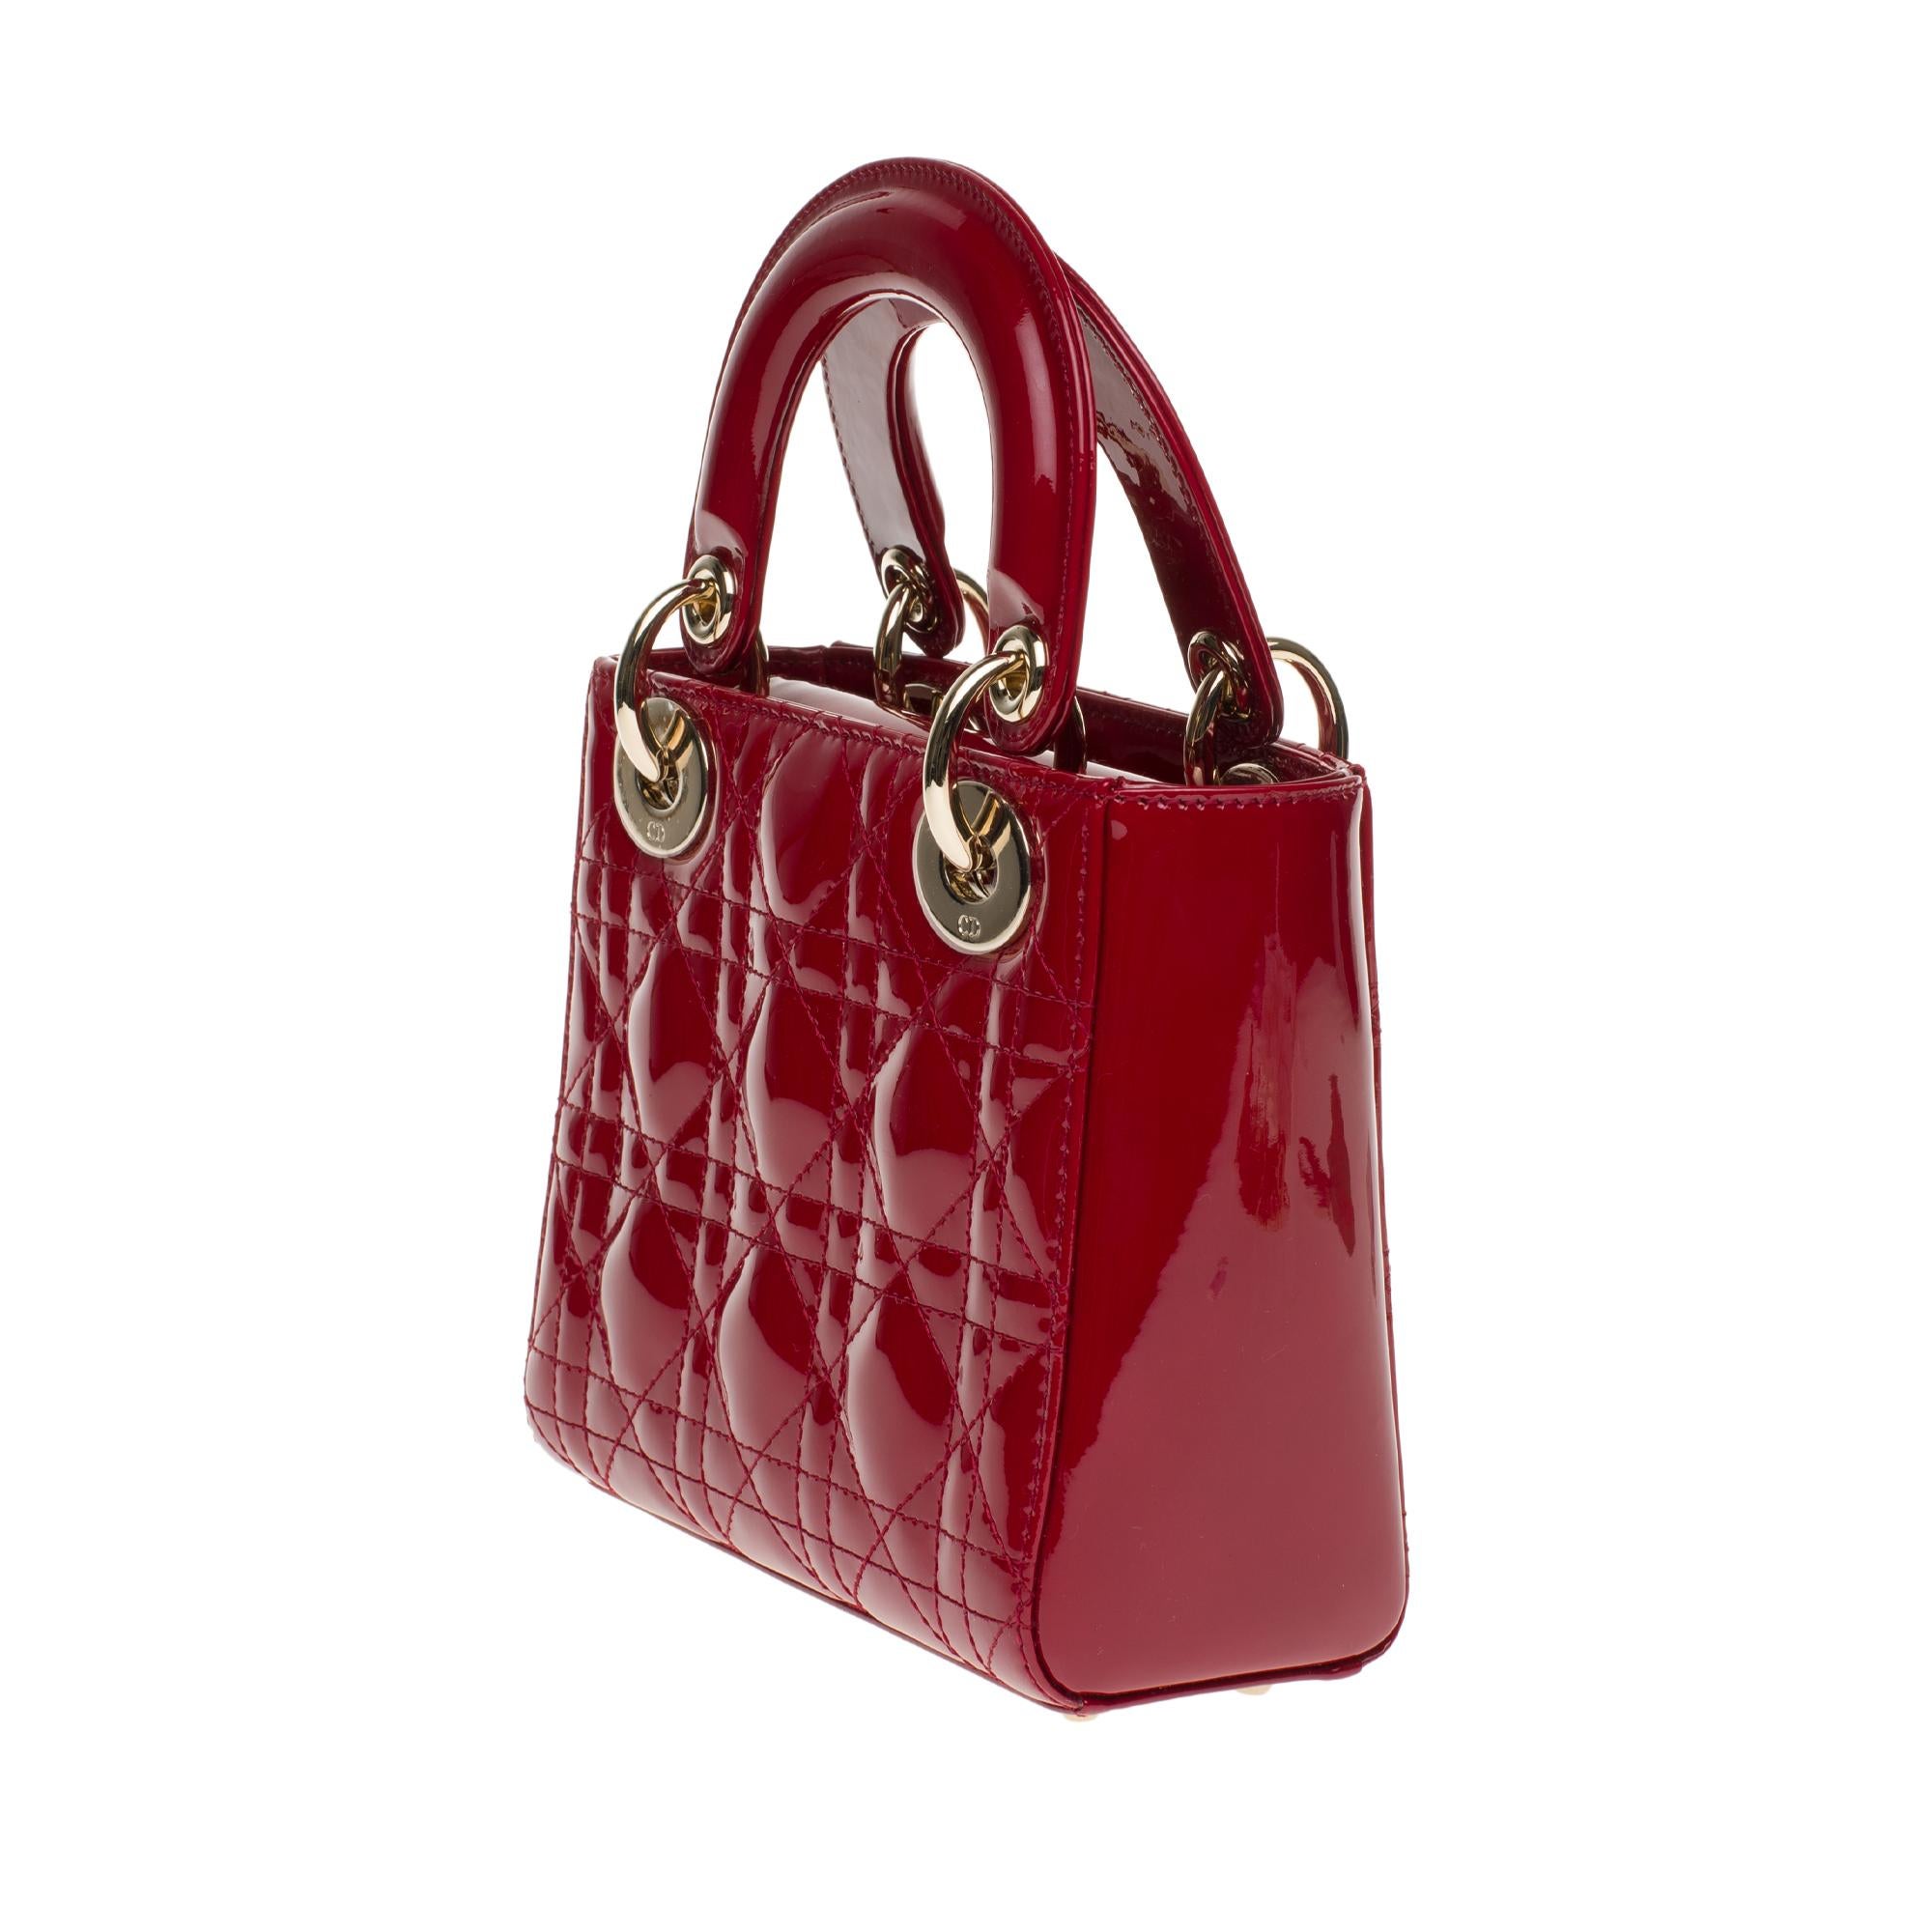 Gray Brand new - Mini Lady Dior handbag with strap in cherry red patent leather